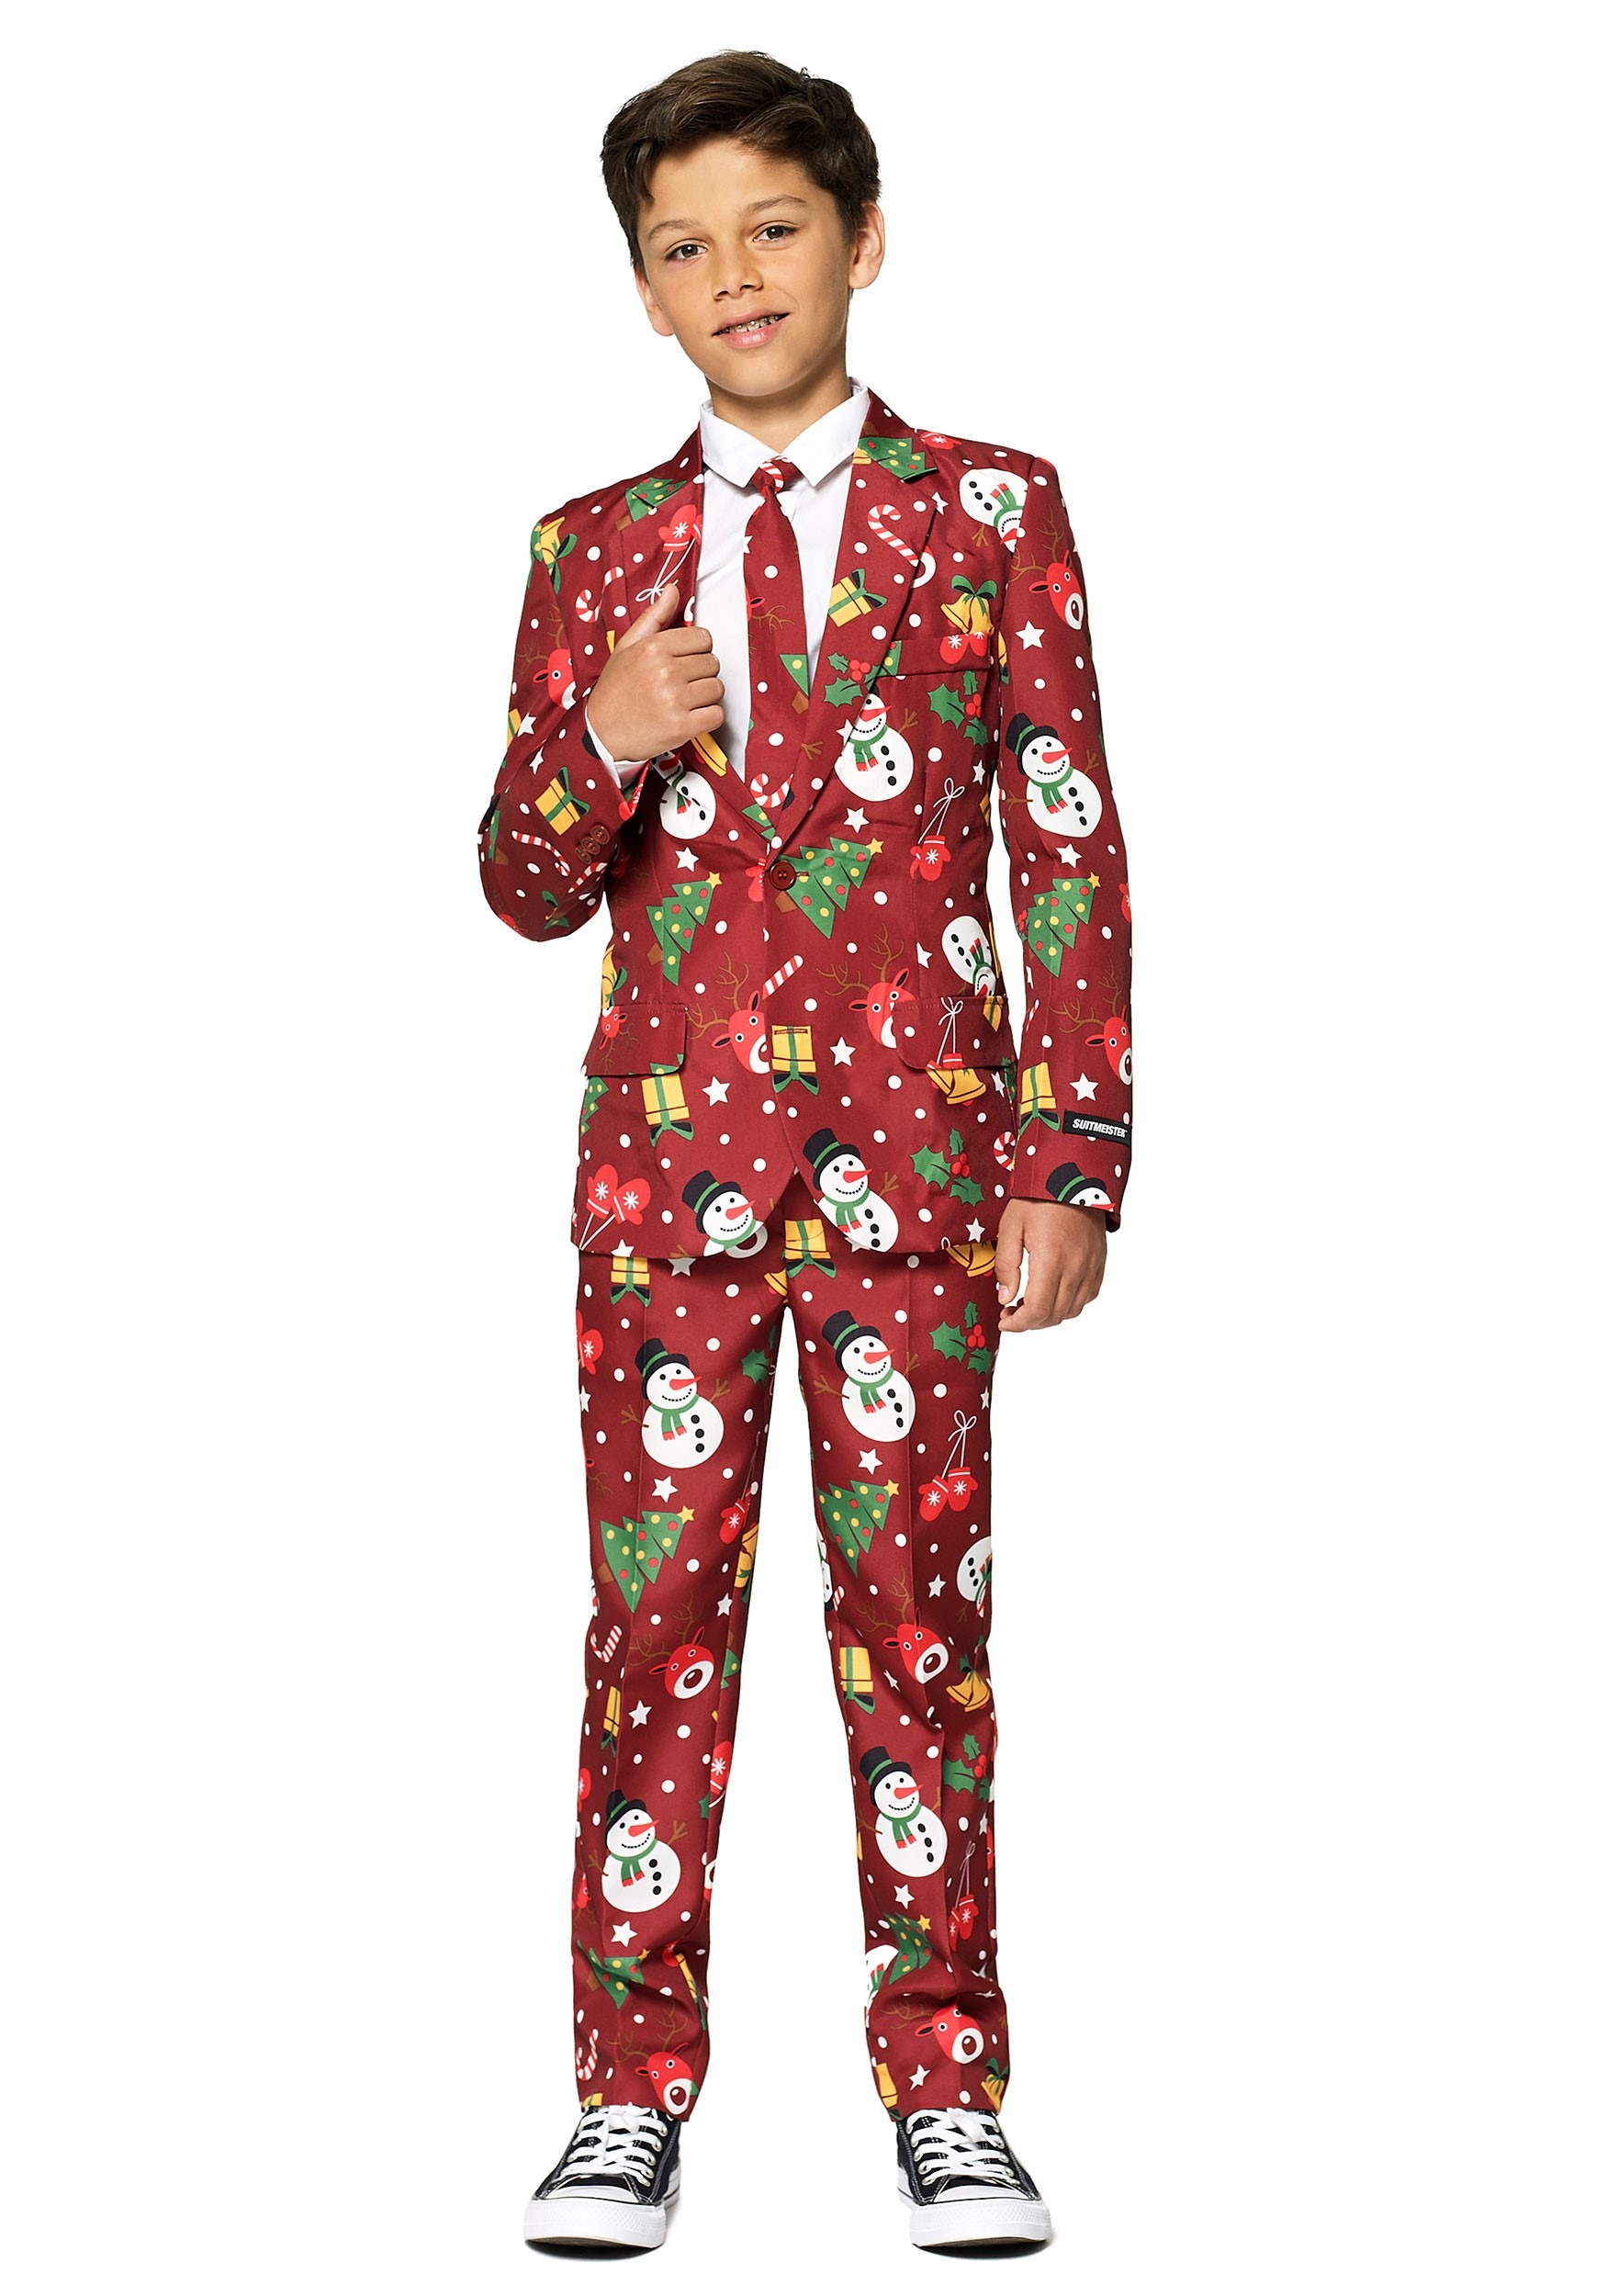 Suitmeister Christmas Red Light Up Suit for Boys